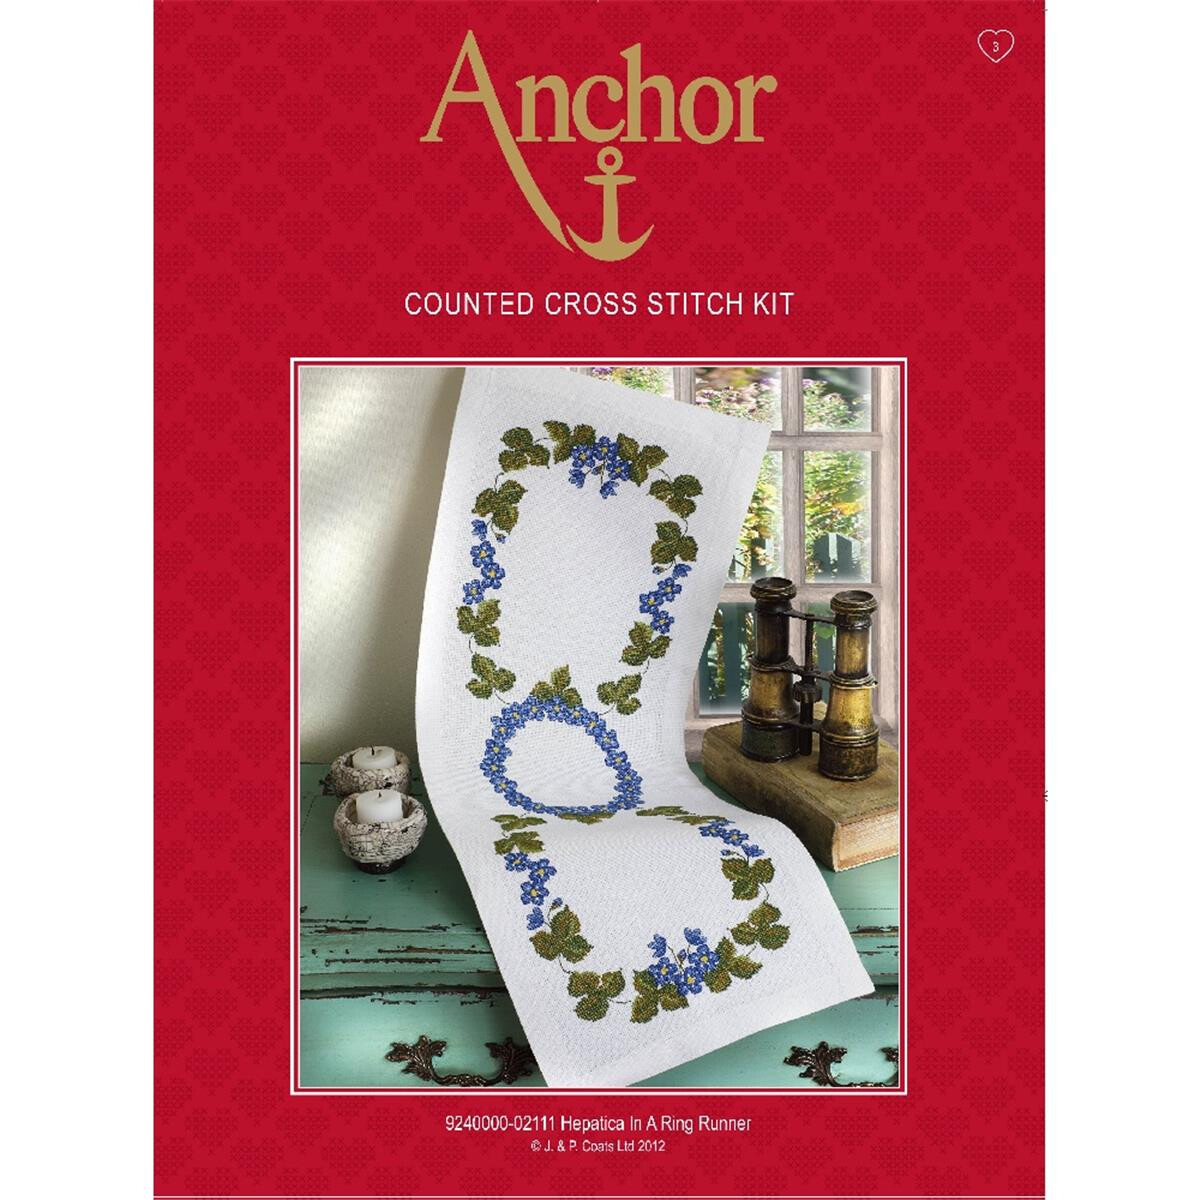 Anchor counted Cross Stitch kit Table runner...